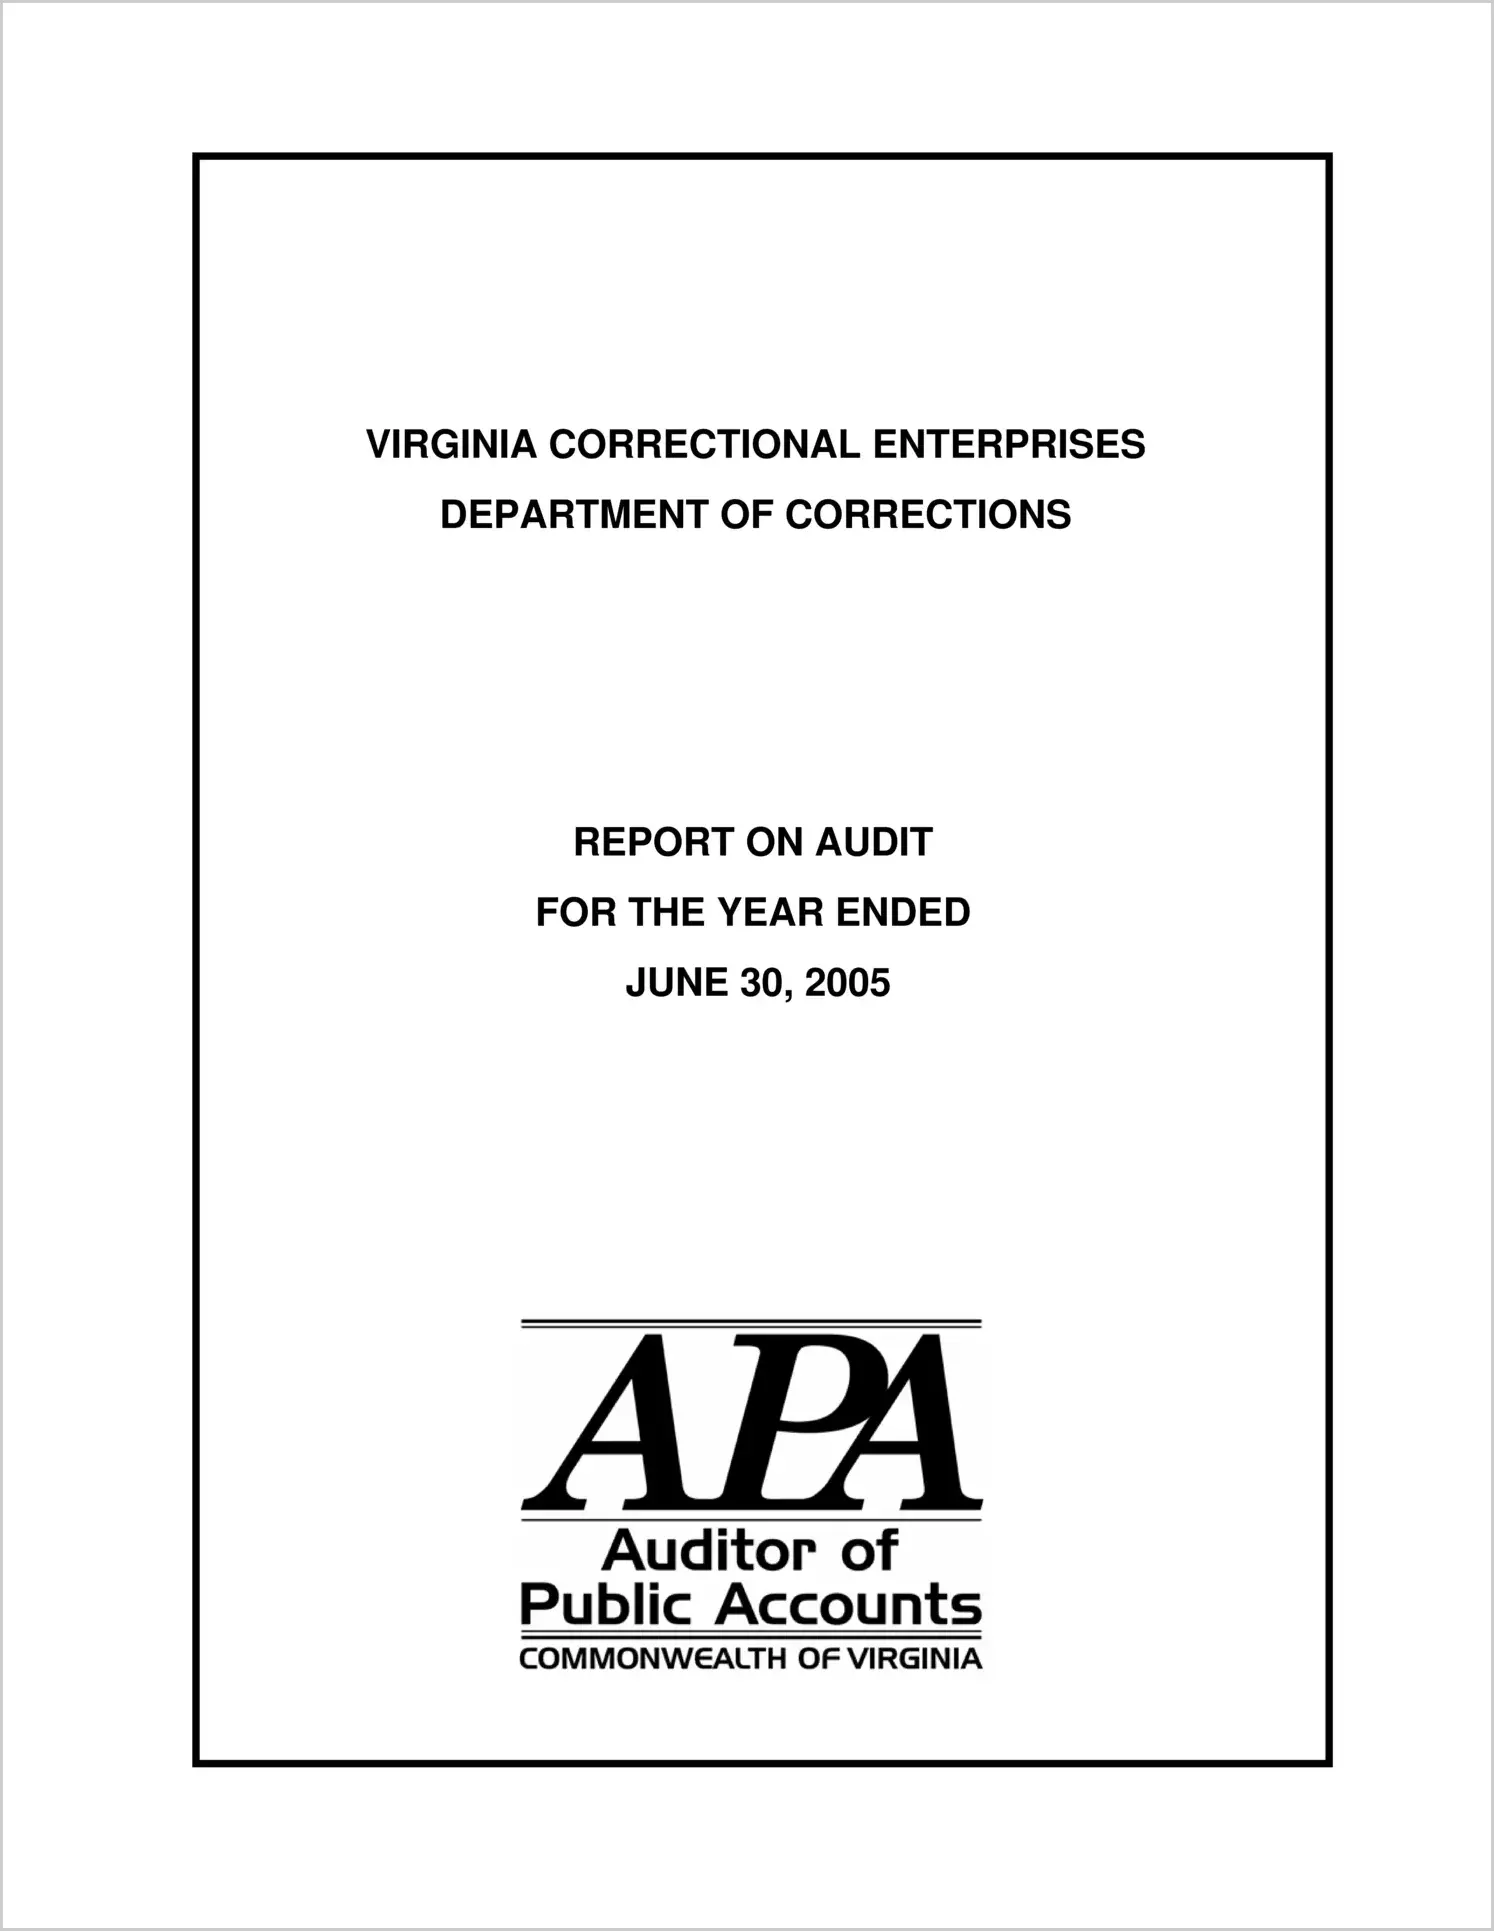 Virginia Correctional Enterprises for the Year Ended June 30, 2005